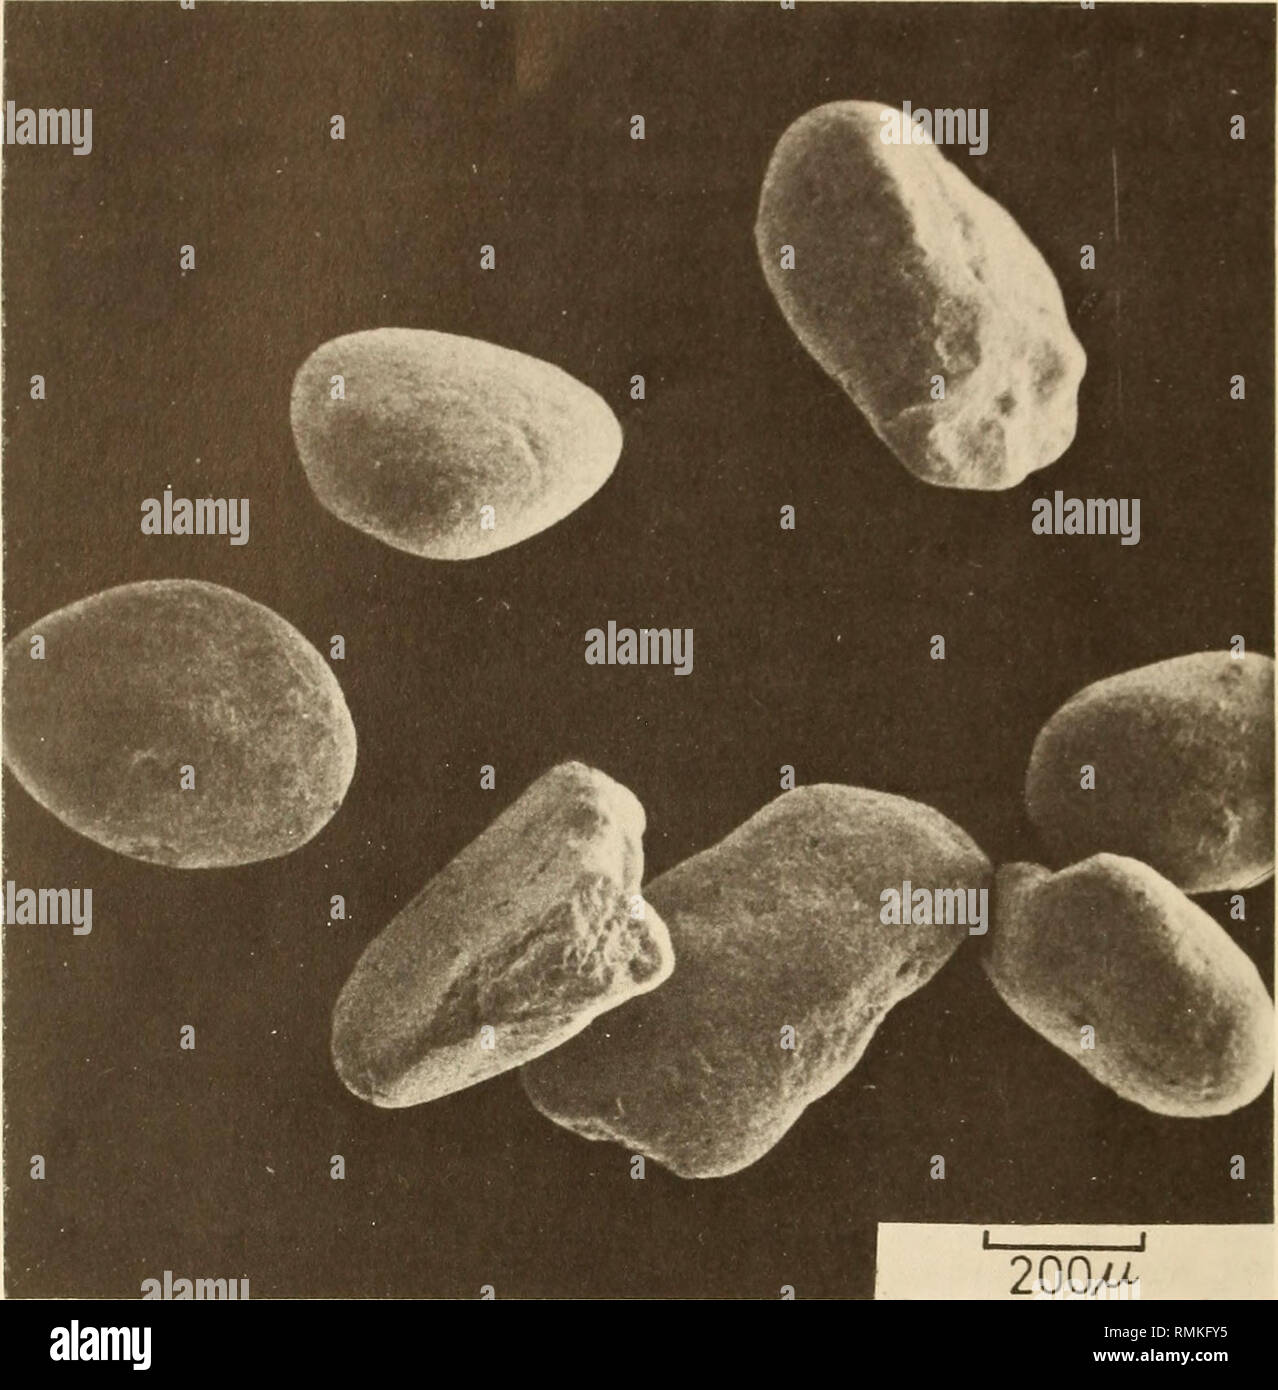 . Annals of the South African Museum = Annale van die Suid-Afrikaanse Museum. Natural history. 222 ANNALS OF THE SOUTH AFRICAN MUSEUM. 200M Fig. 2 Morphology of typical pelletal phosphorite. possibility of coprolites in their sediments. Arakawa (1971) illustrates some faecal pellets of invertebrates which are very similar to those found in the Vars- water Formation. Very rare are some well-rounded pellets composed of aggre- gates of smaller pellets and phosphate cemented. The ovoidal pellets are usually brown, orange or red, but black and green pellets have also been noted. Towards the base of Stock Photo